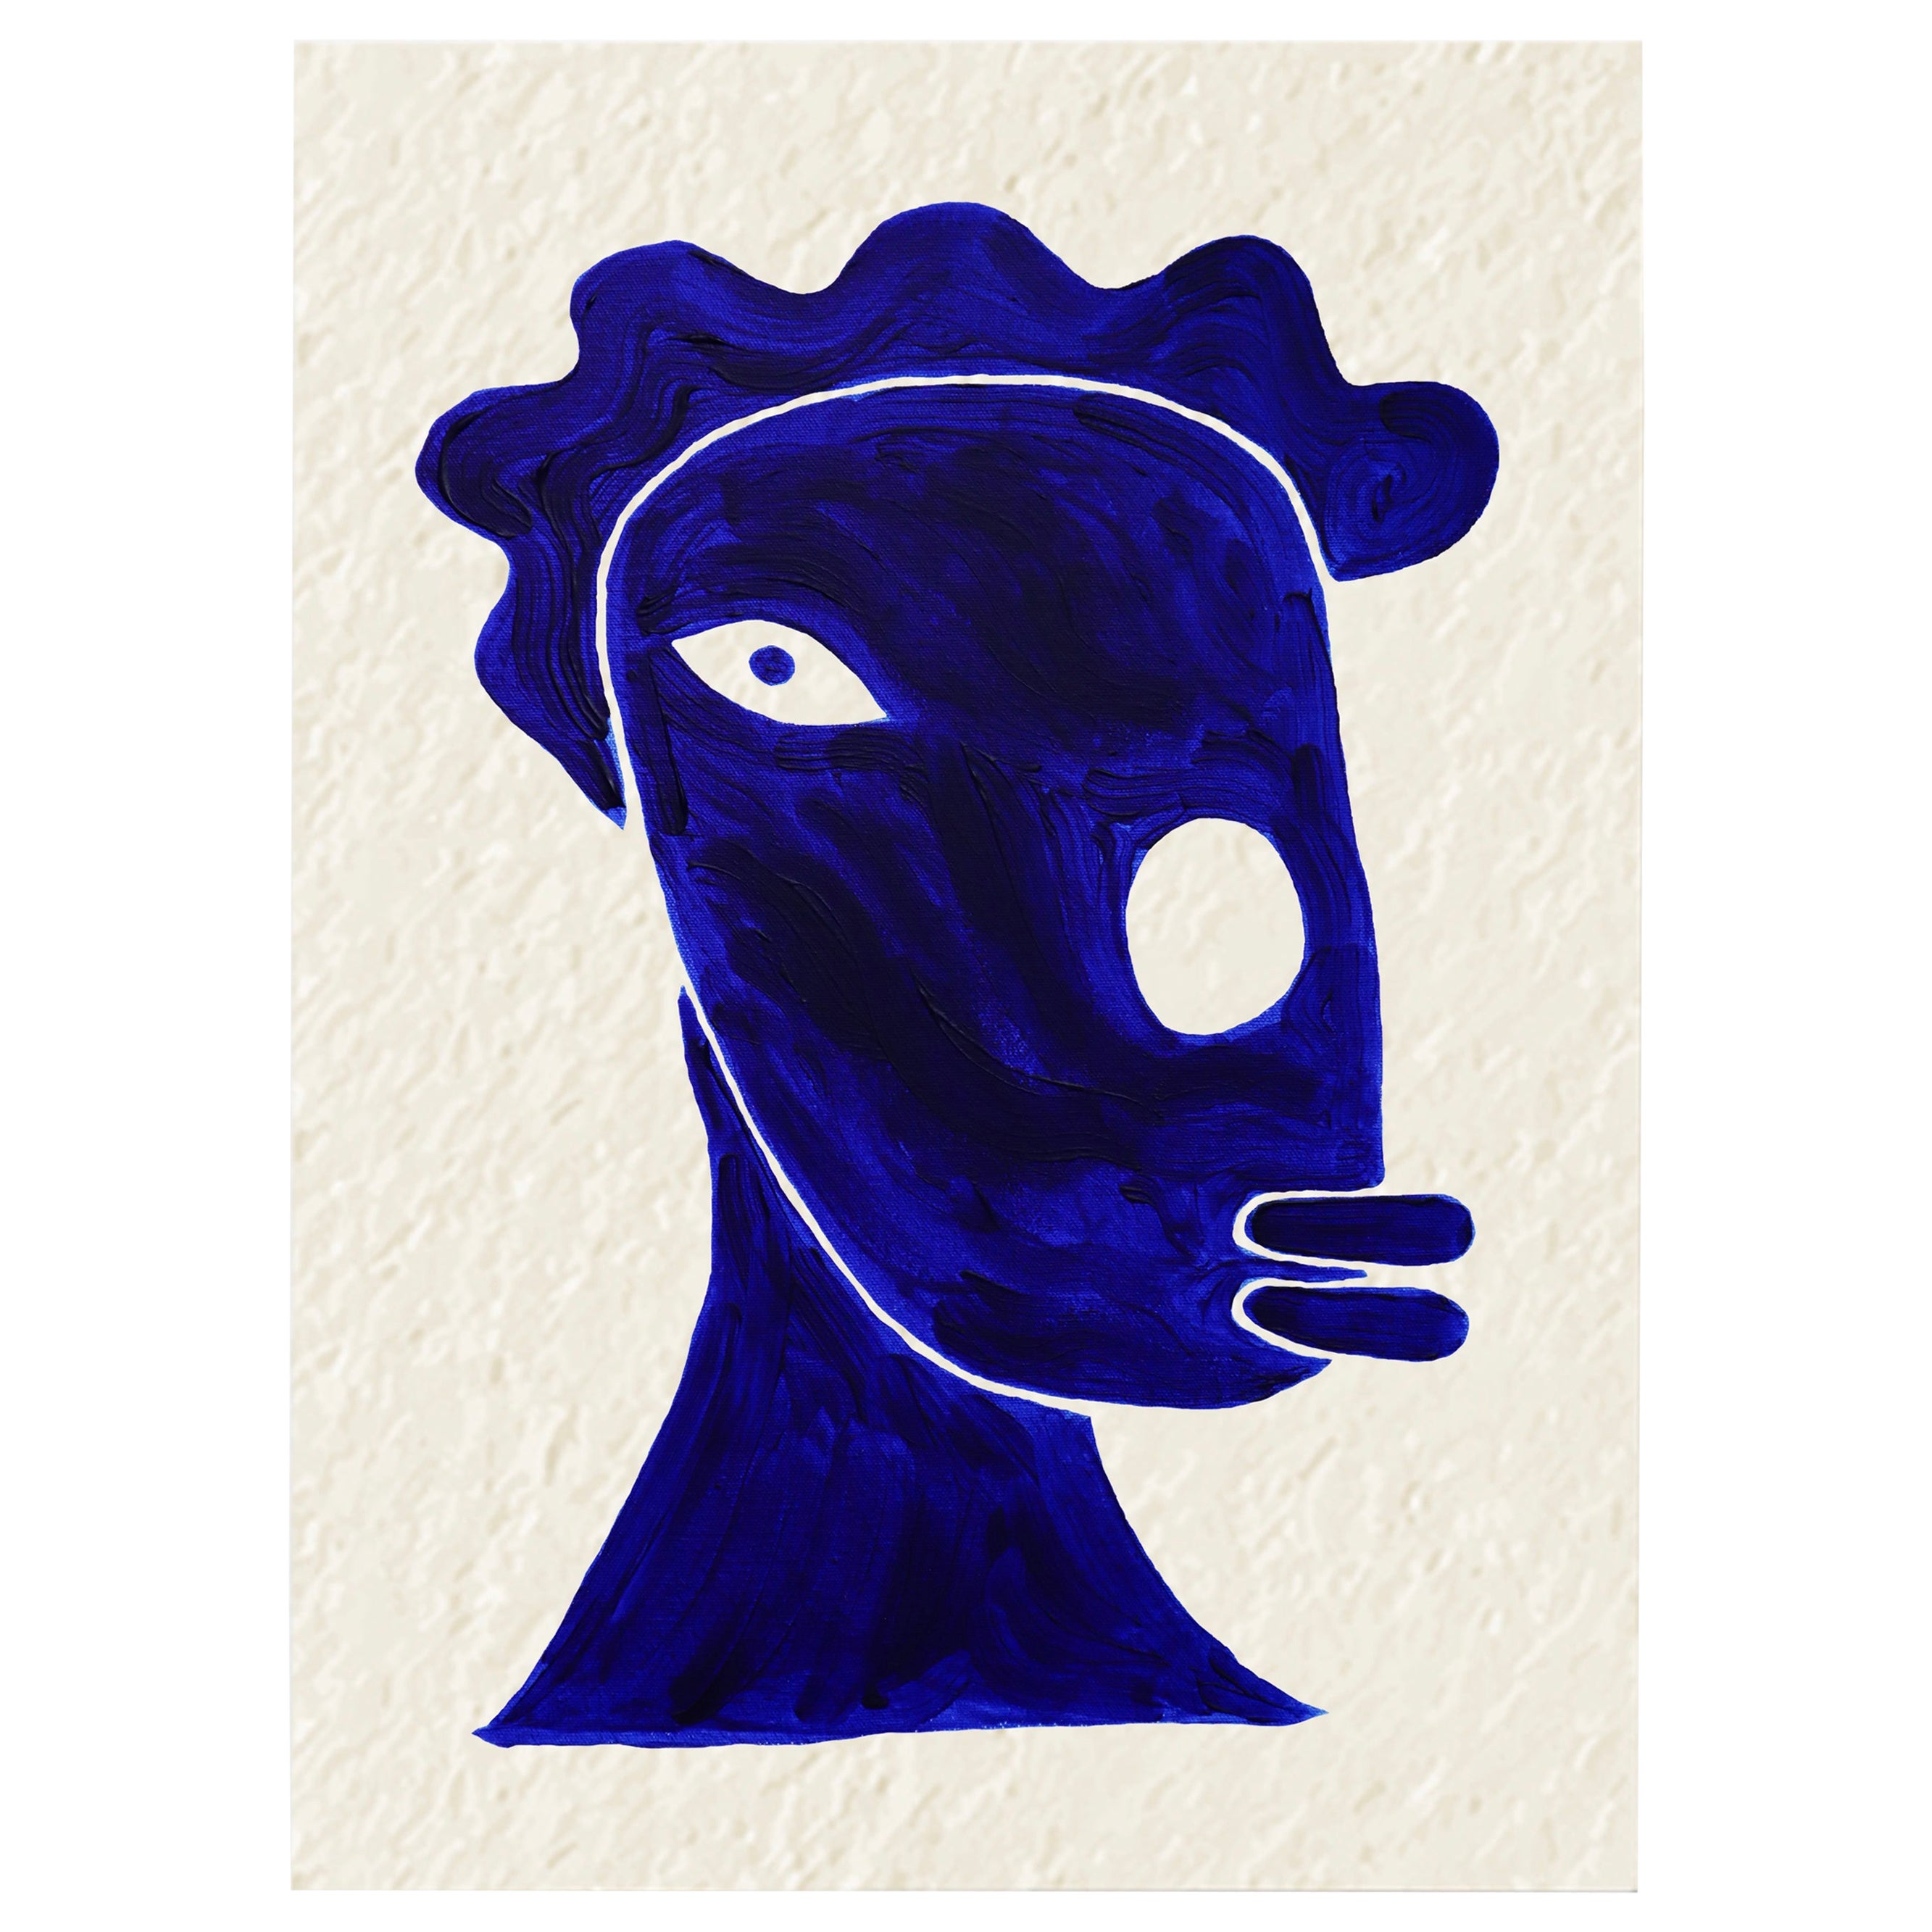 Yow Blue African Contemporary Print on Giclée Hahnemühle Abstract Expressionism For Sale